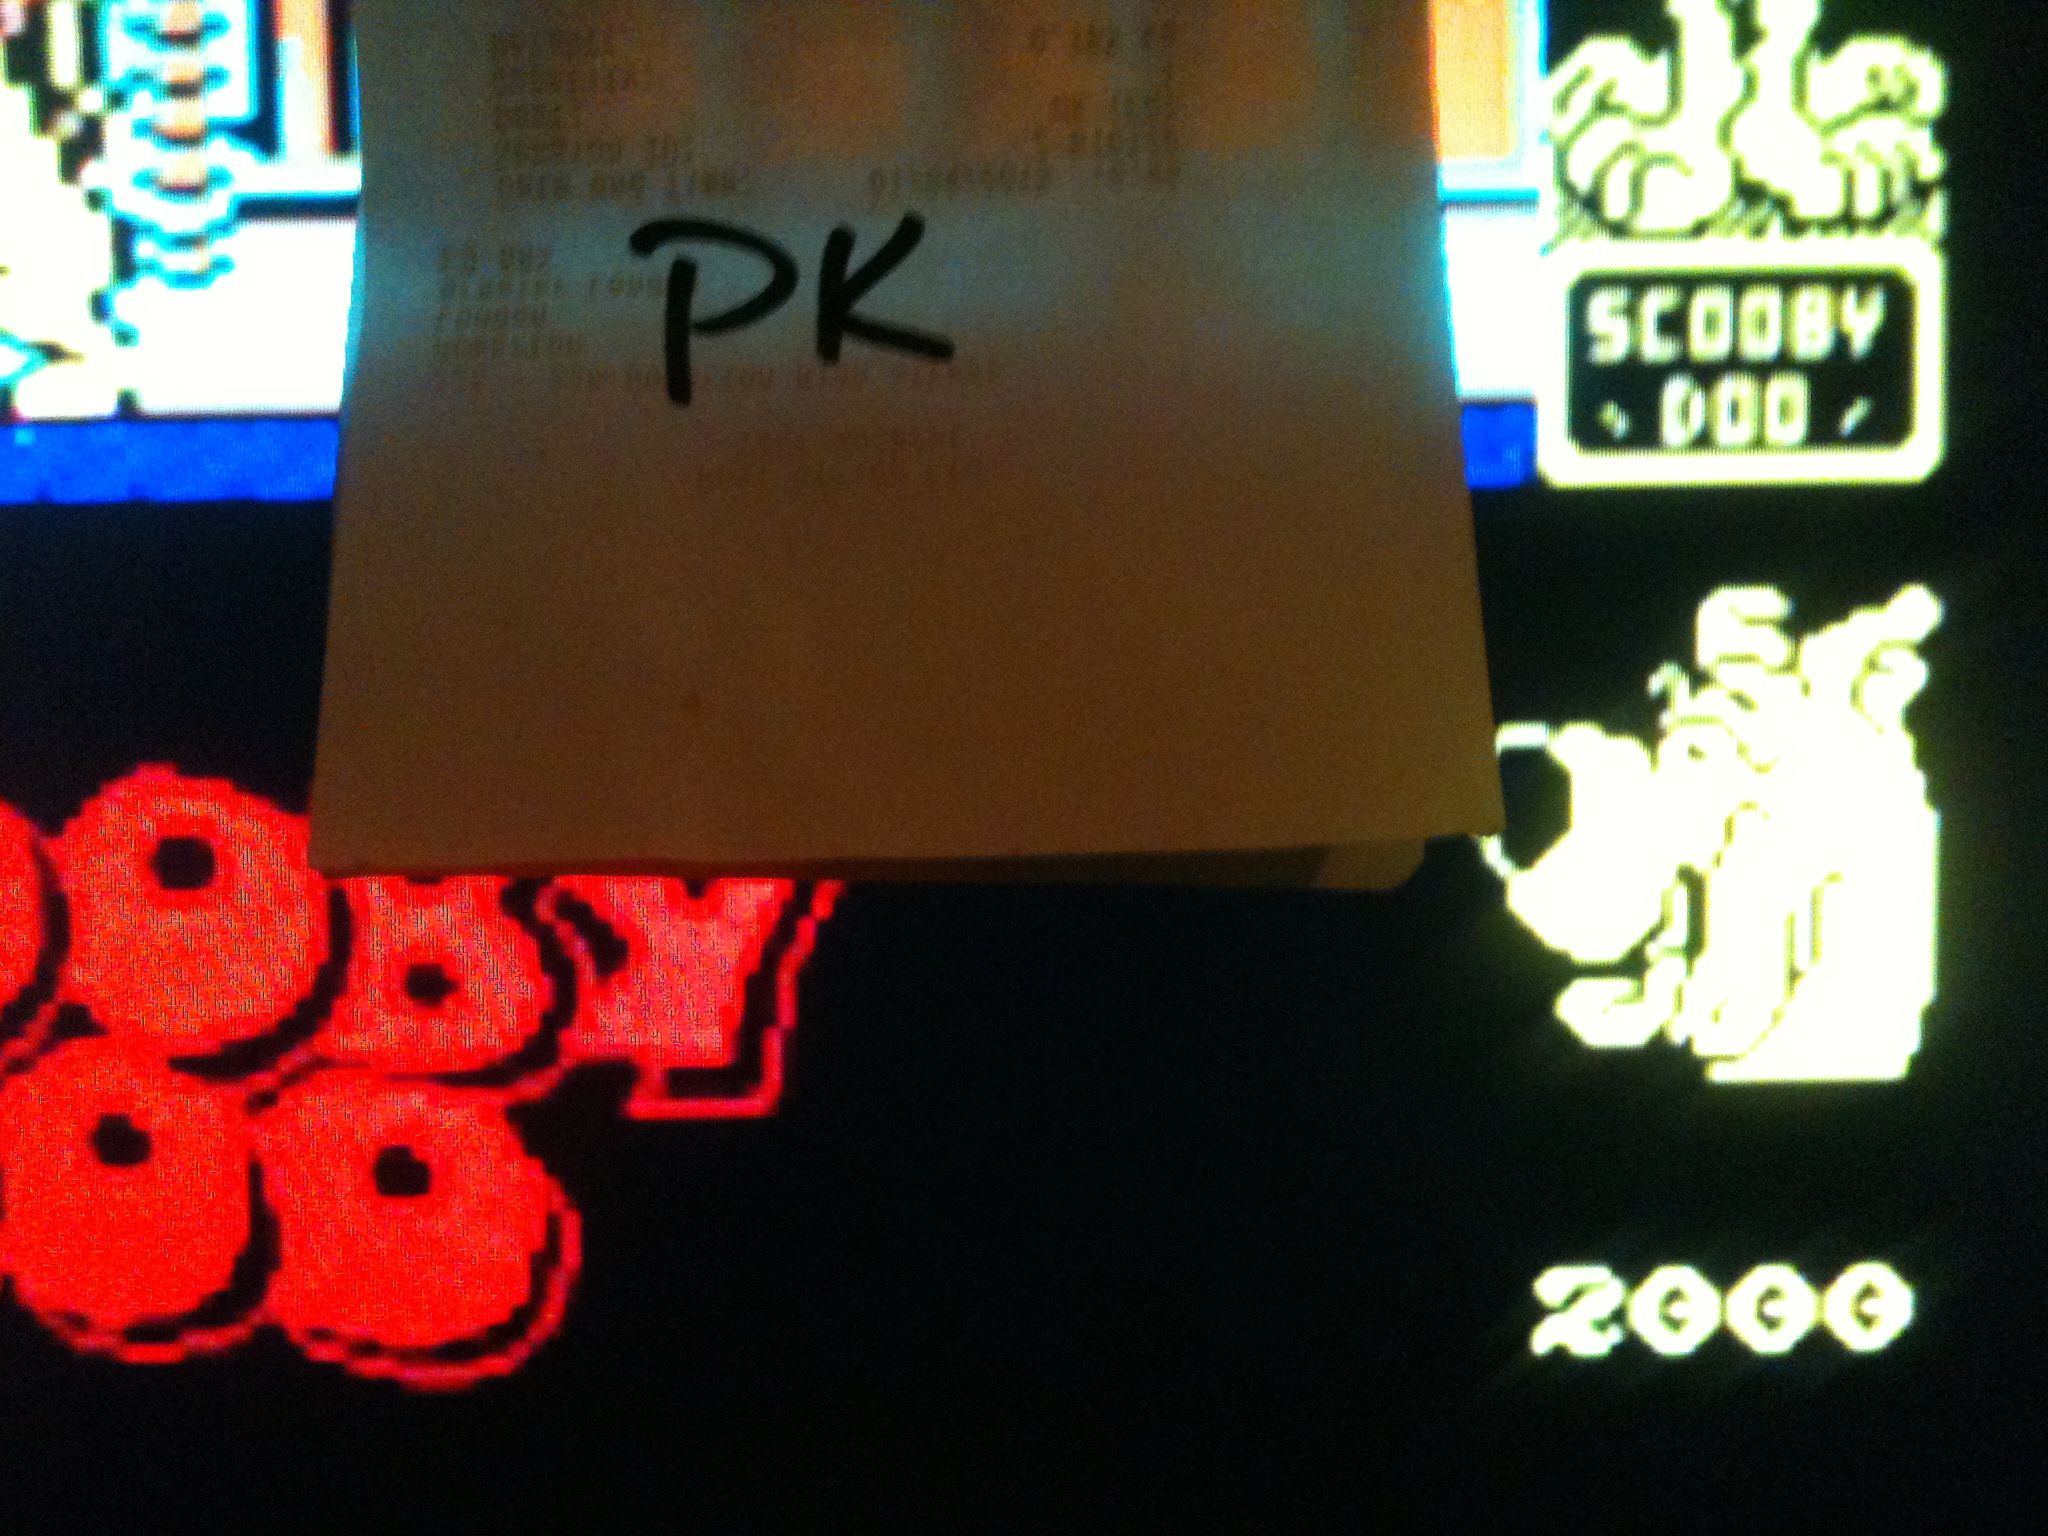 kernzy: Scooby Doo (Commodore 64 Emulated) 2,000 points on 2015-09-22 17:14:17